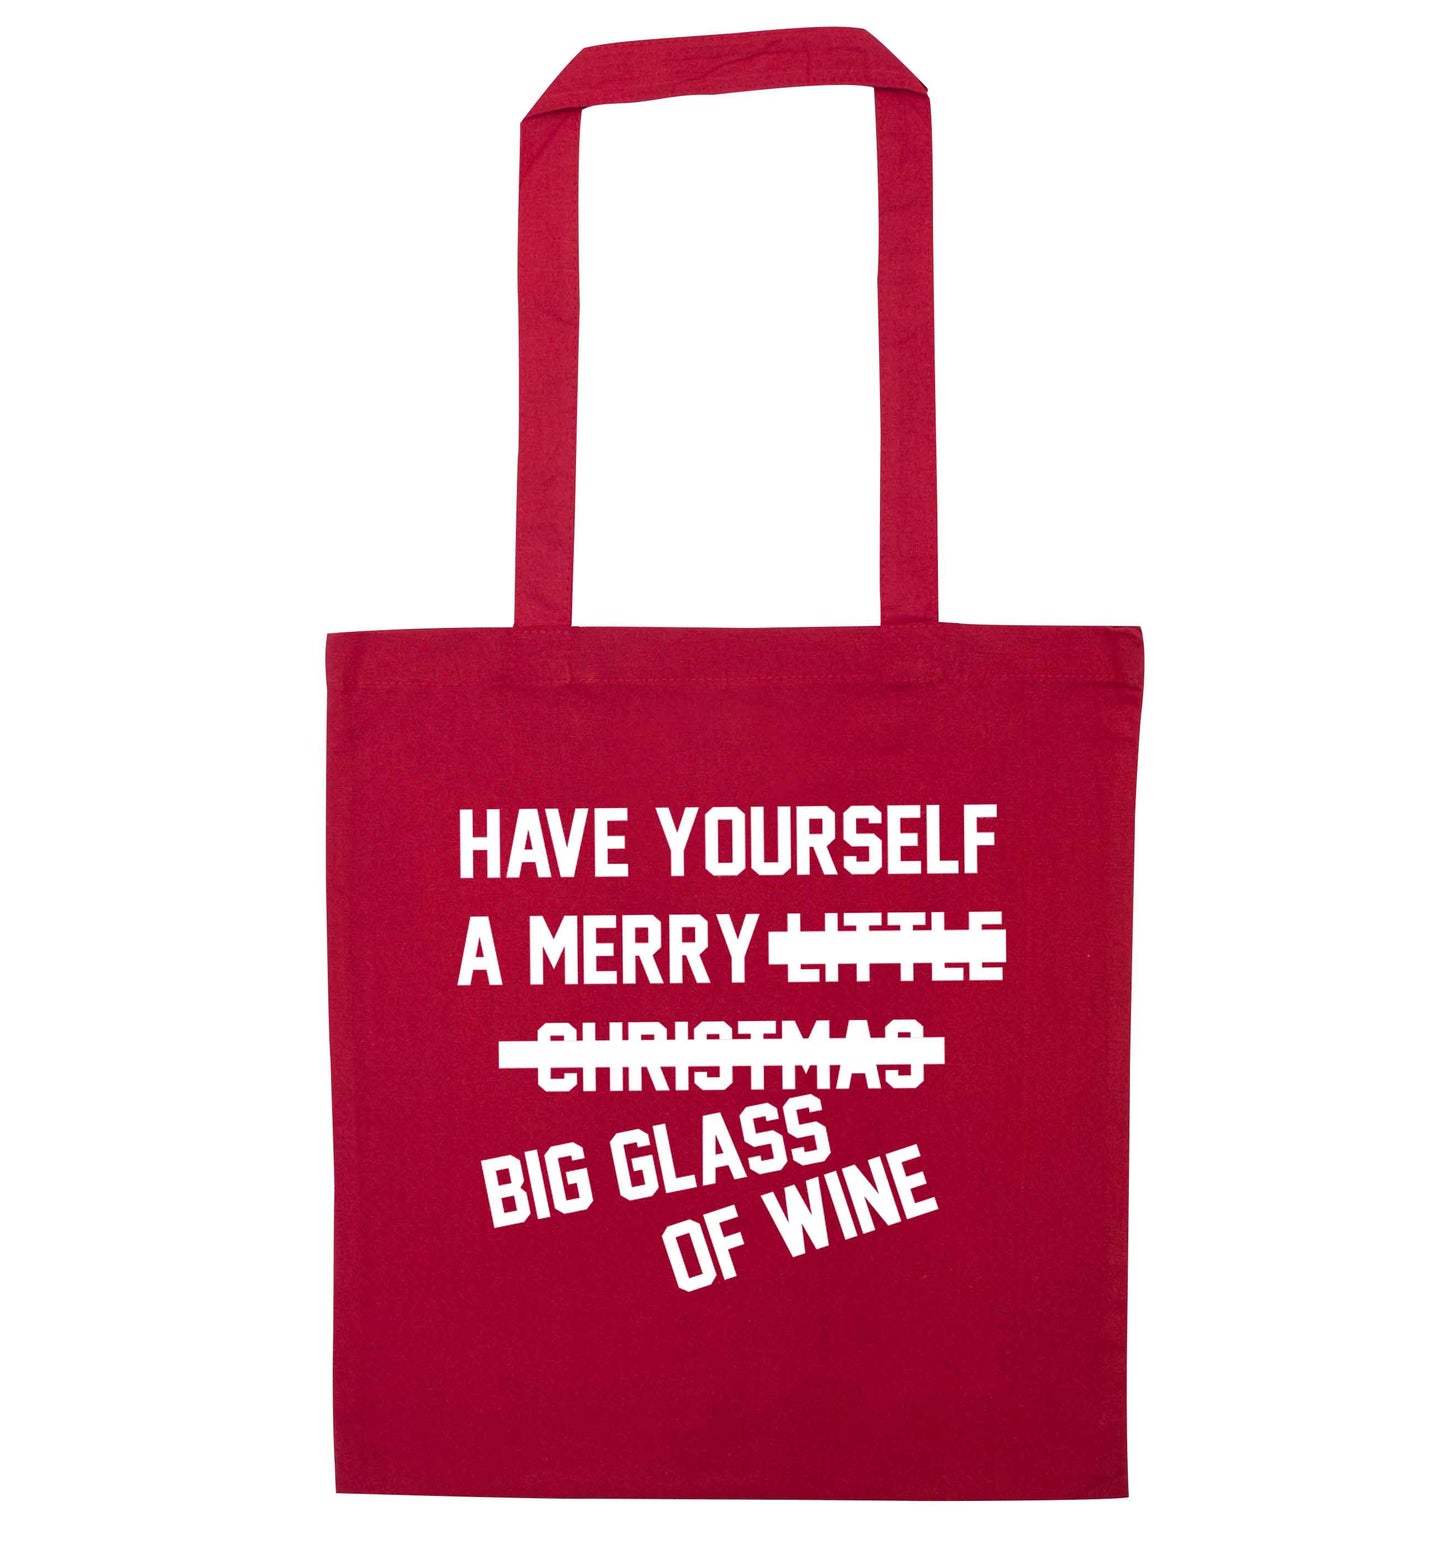 Have yourself a merry big glass of wine red tote bag